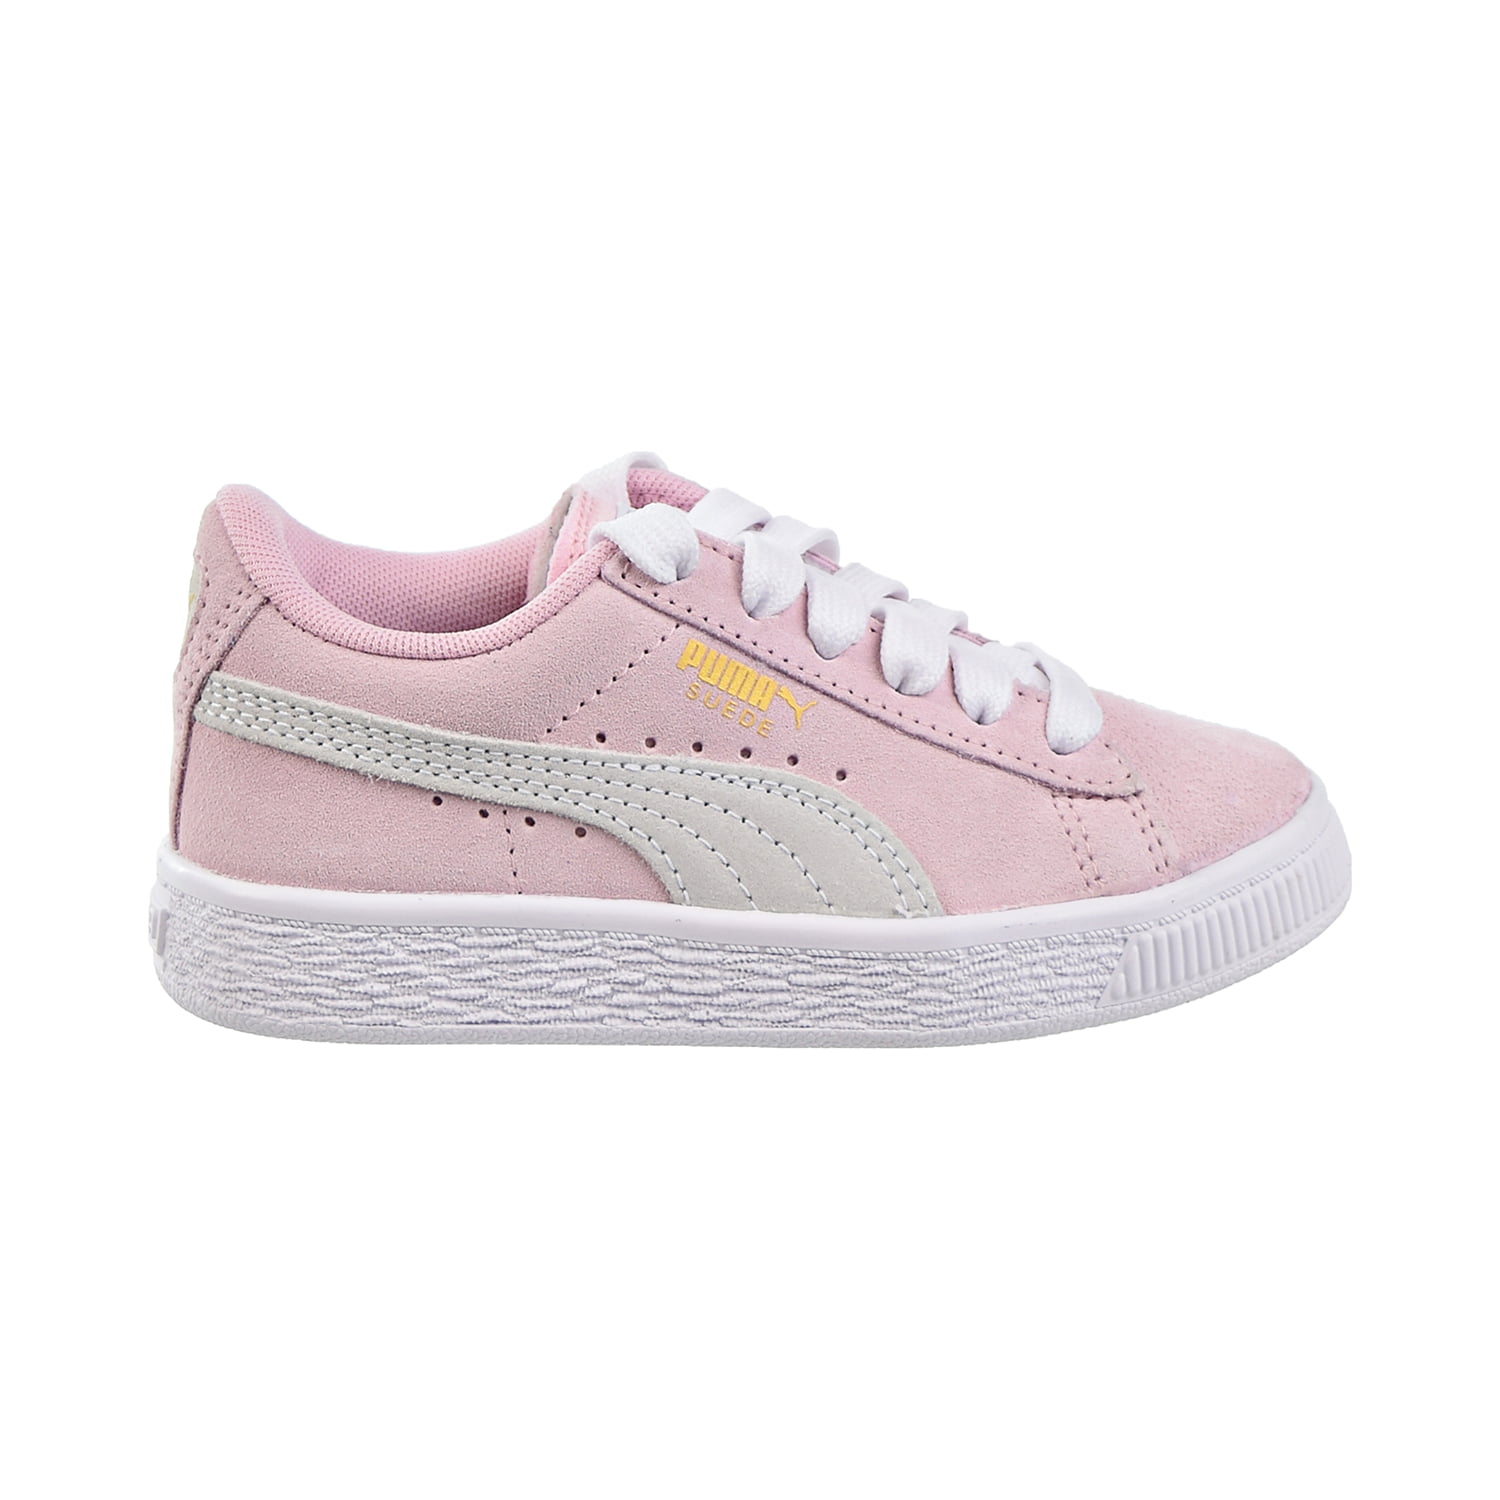 puma shoes pink and white